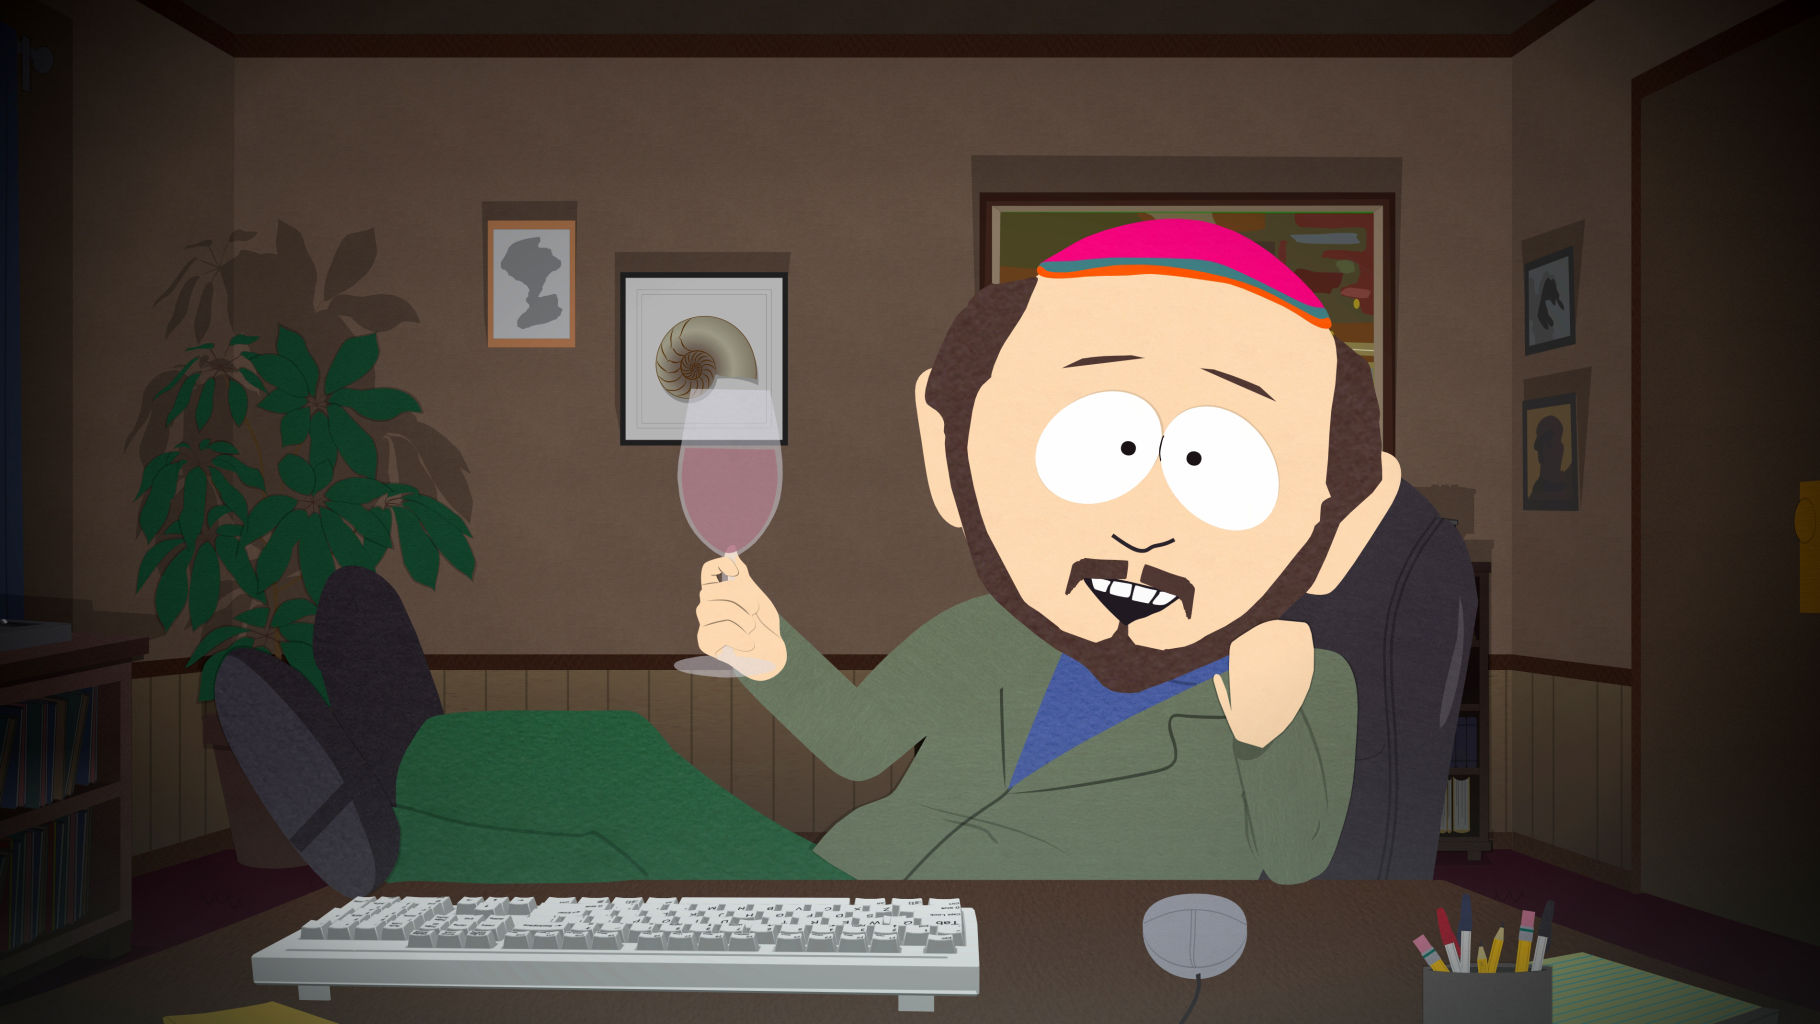 south-park_2003_the-damned_gerald_1.jpg.